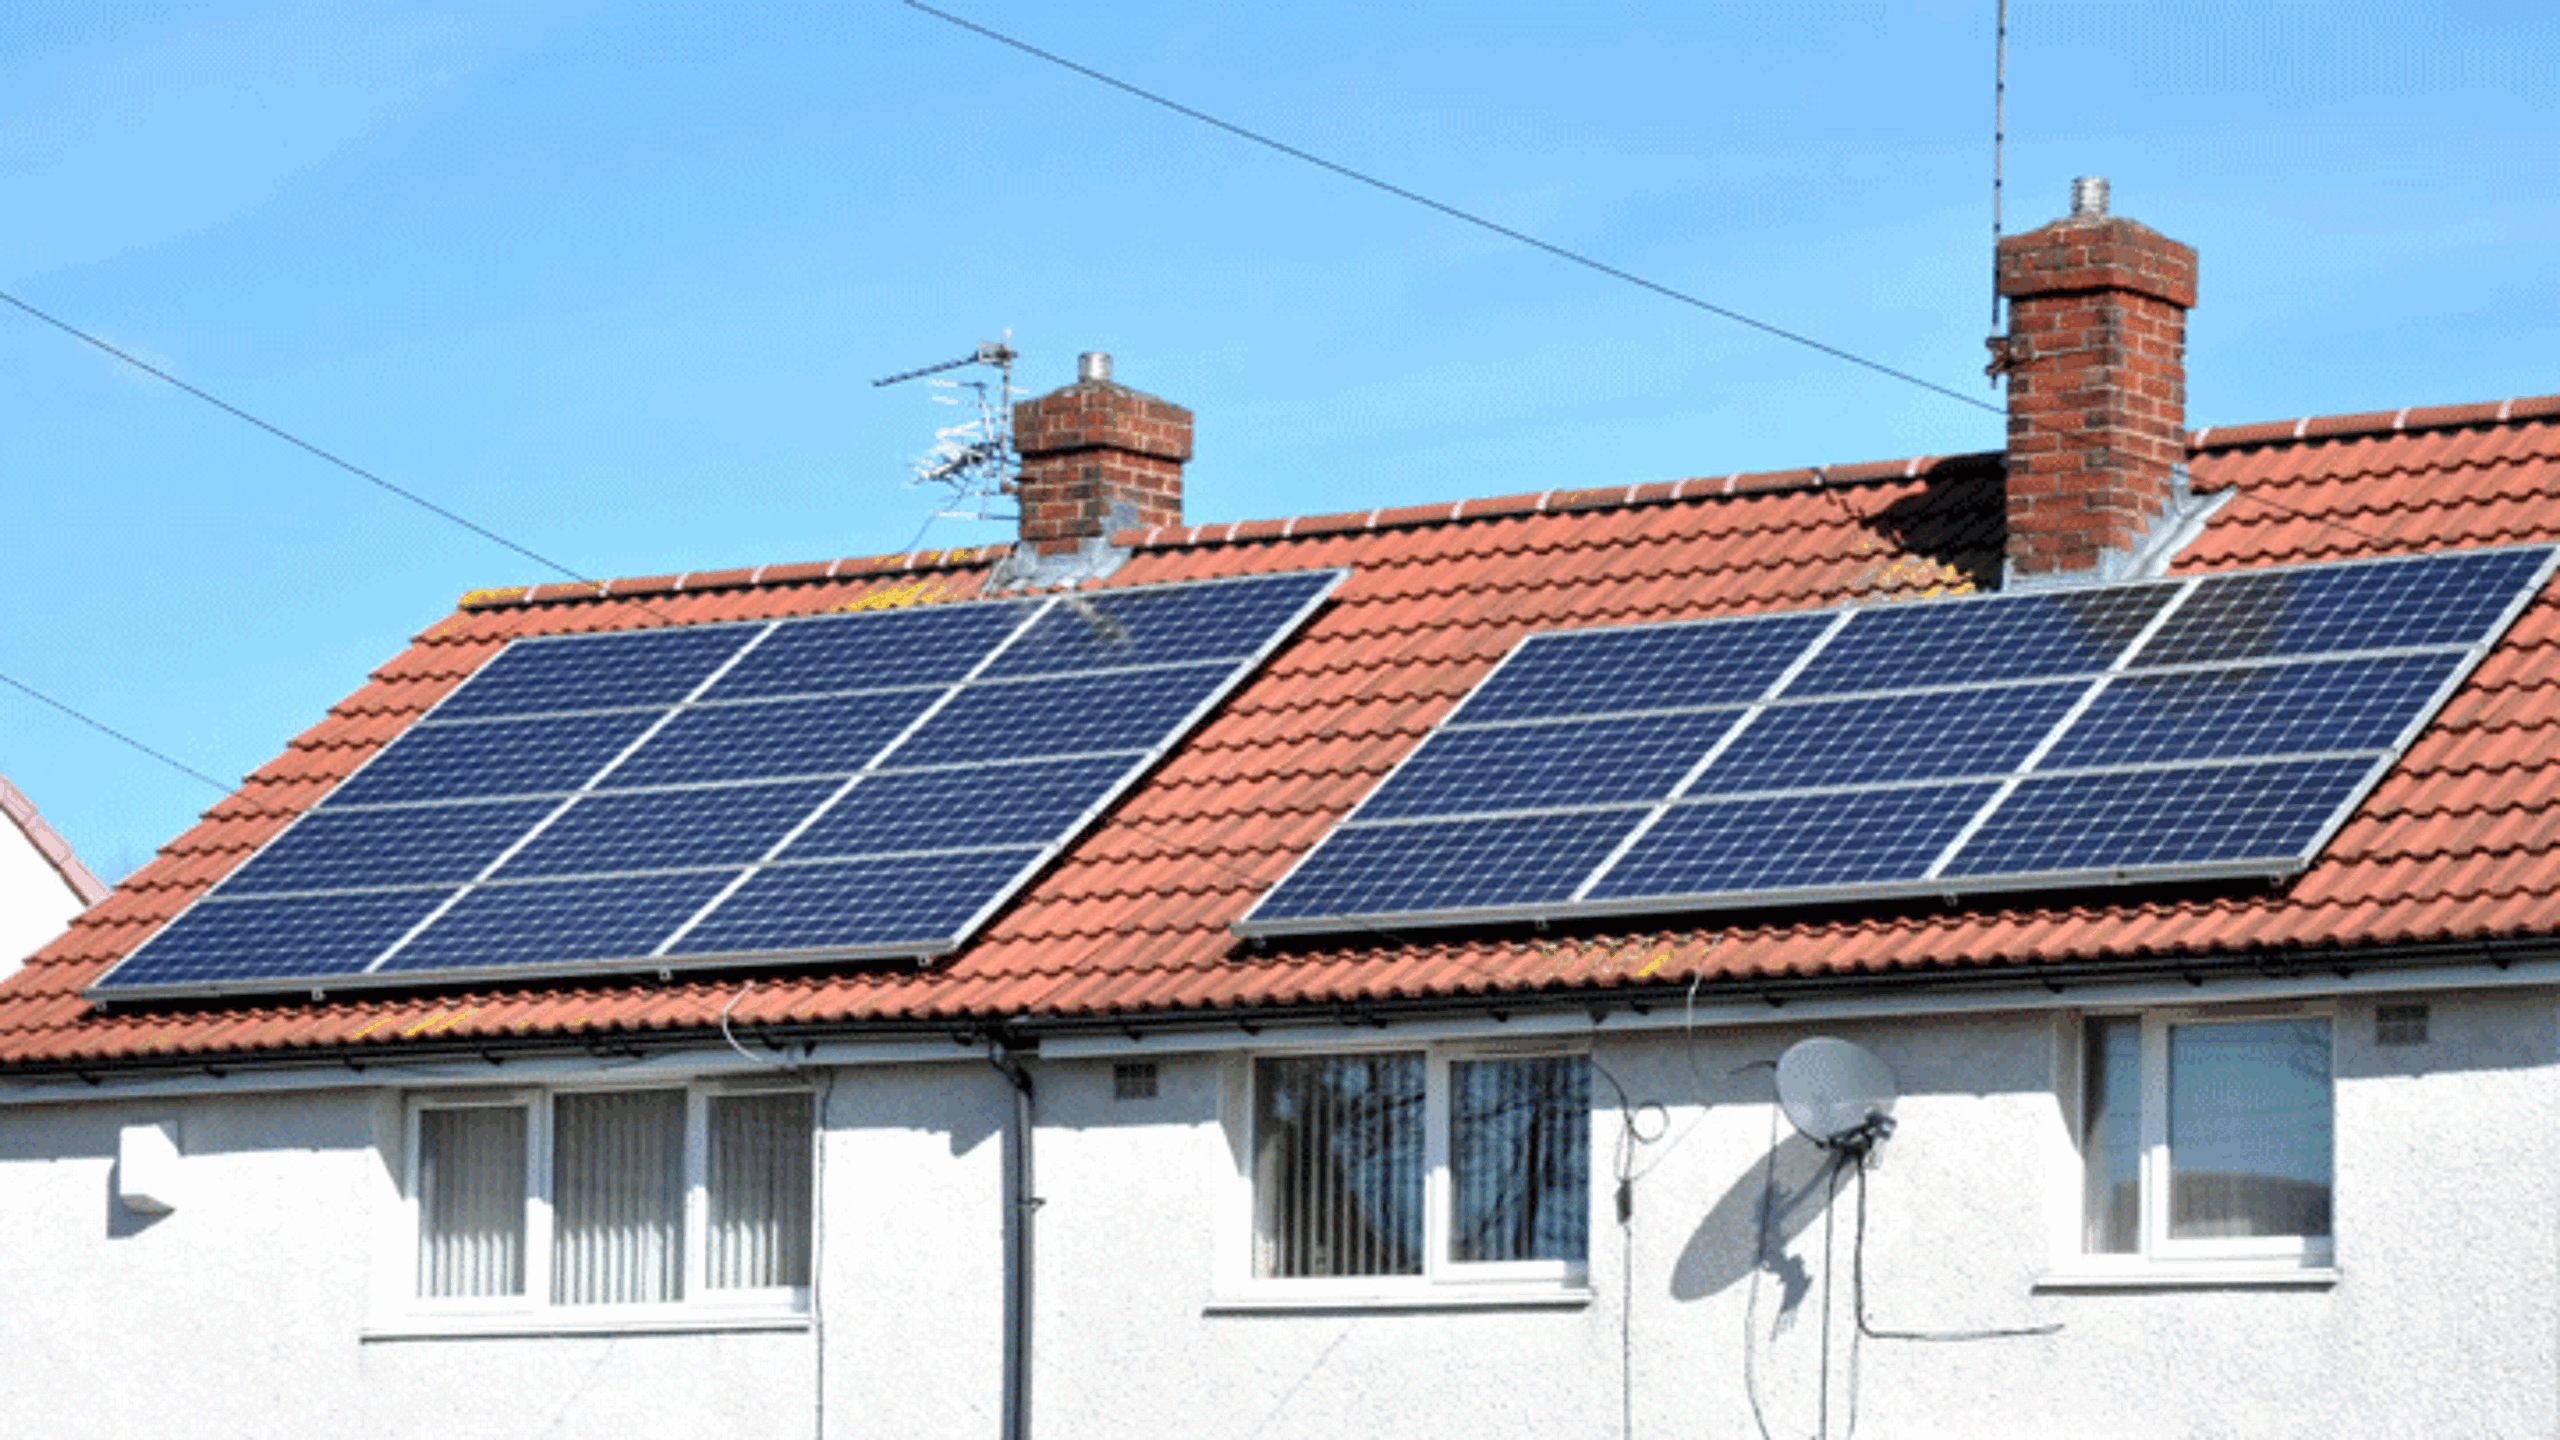 UK considers axing VAT on battery storage co-located with home solar